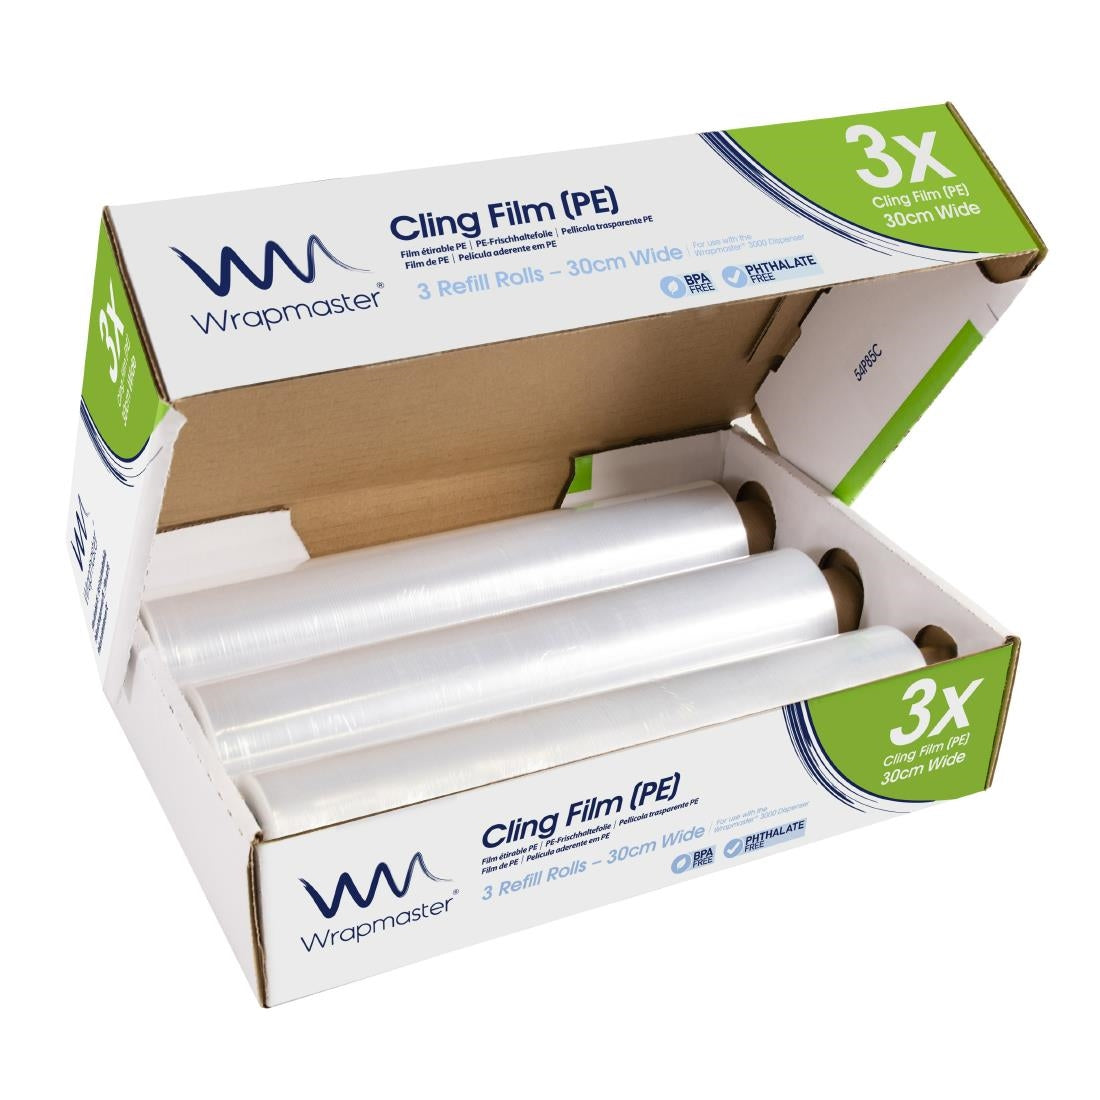 GL381 Wrapmaster PE Cling Film Refill for Wrapmaster 3000 300mm x 300m (Pack of 3)